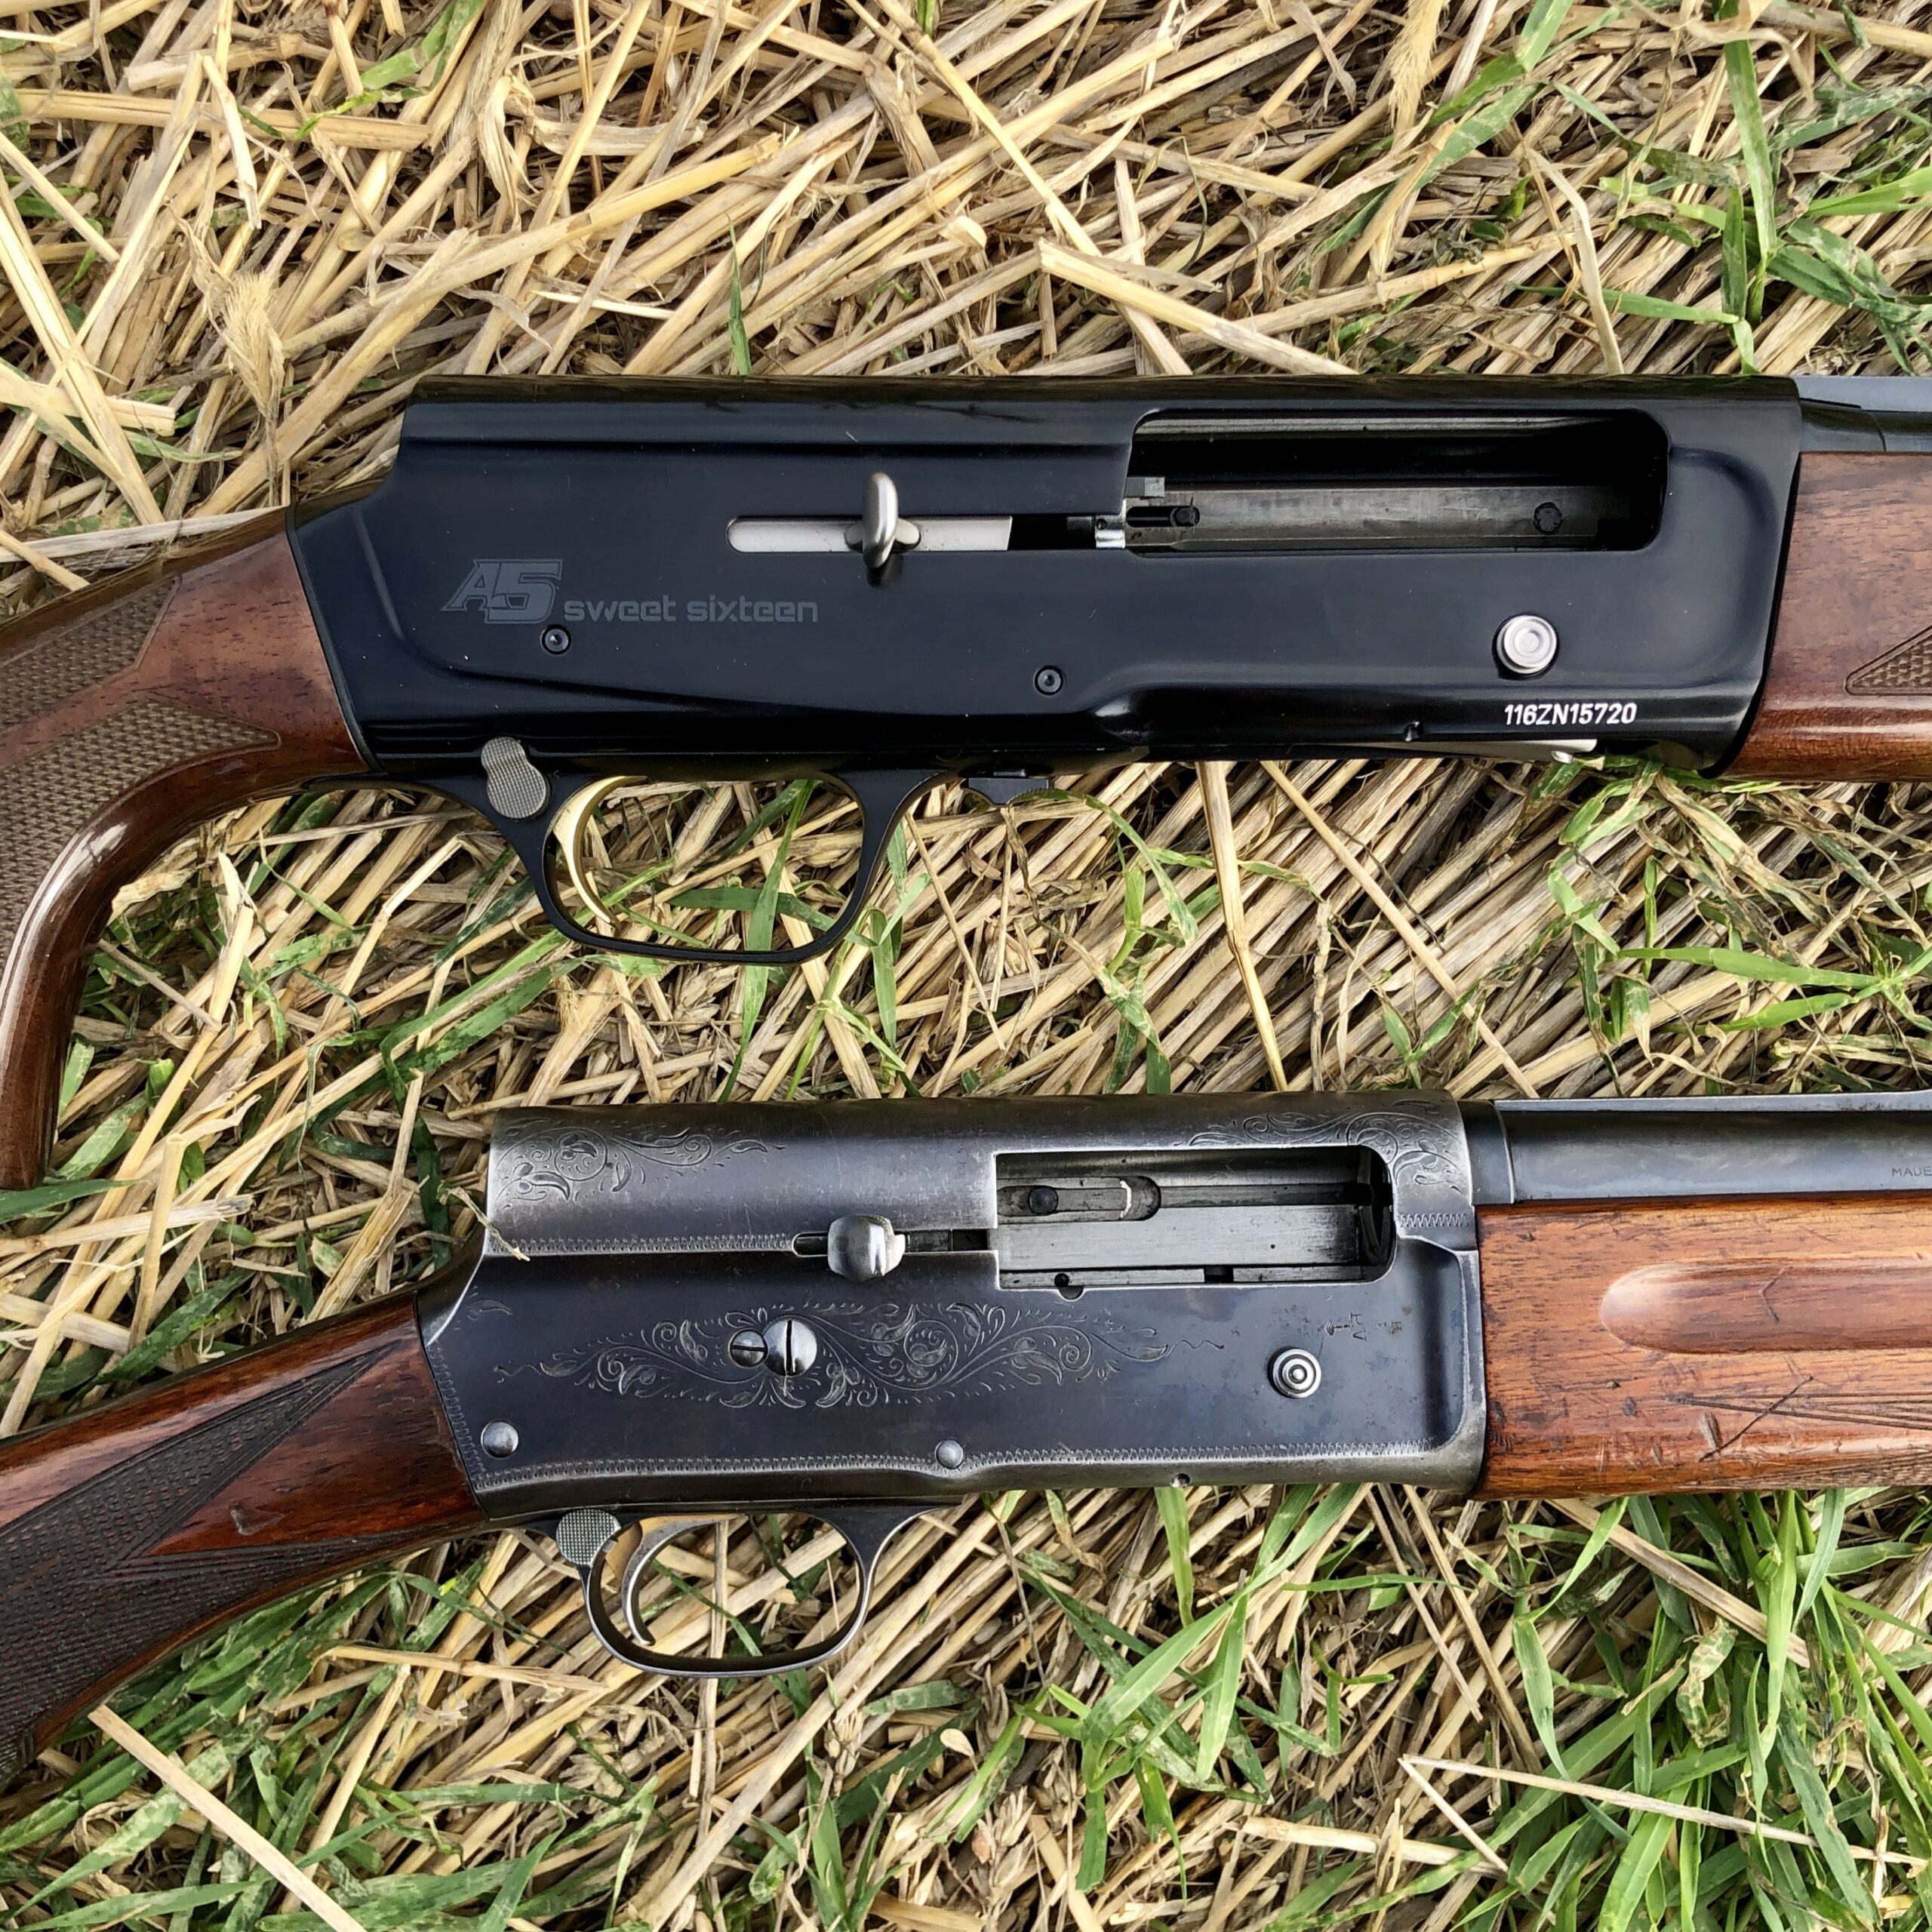 A new and an old wood-stocked semi-auto shotguns on a grass background.